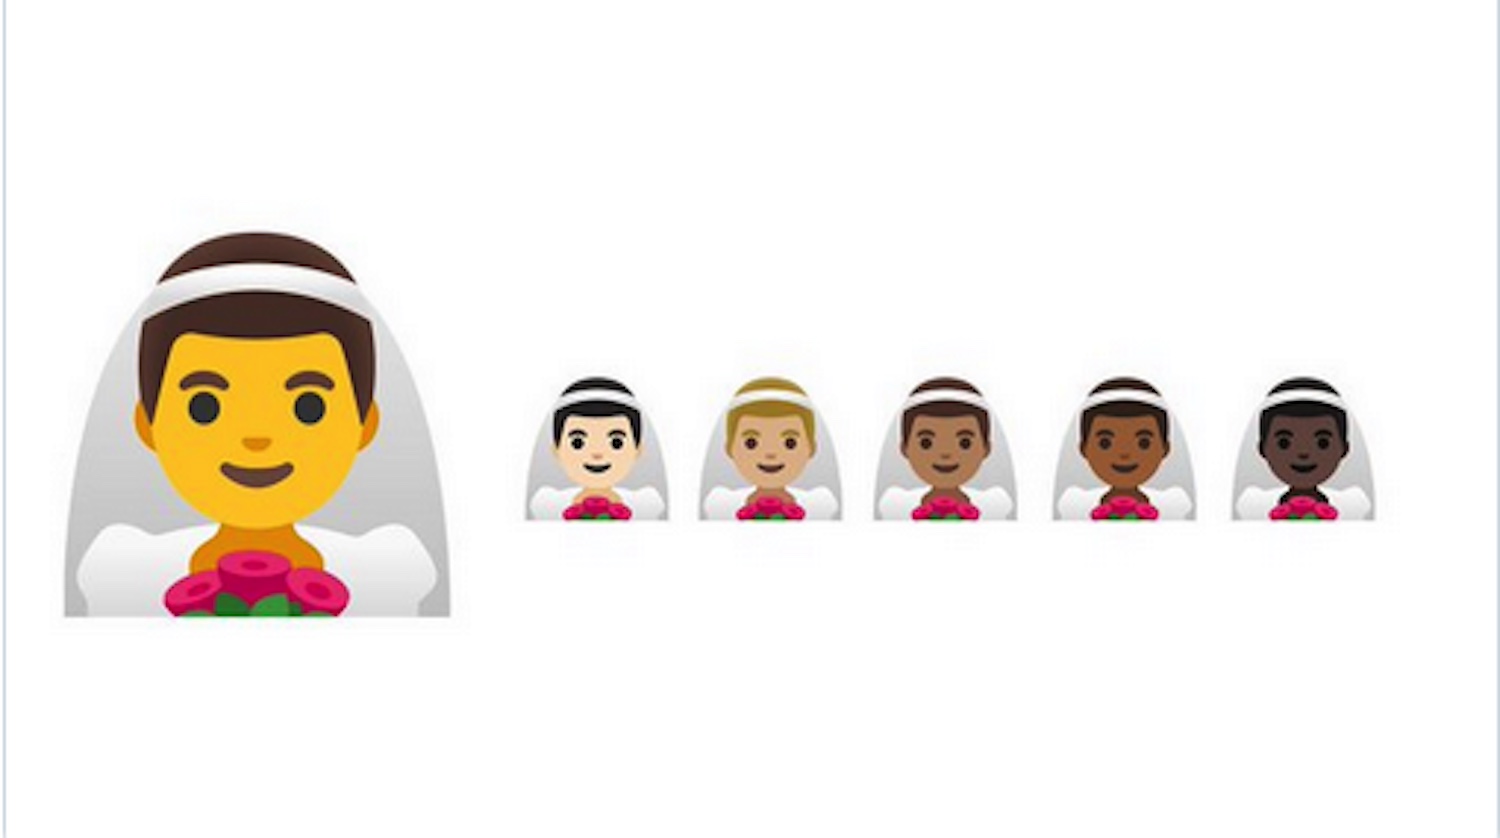 A new emoji of a man in a wedding veil has been released and people aren’t happy, of course